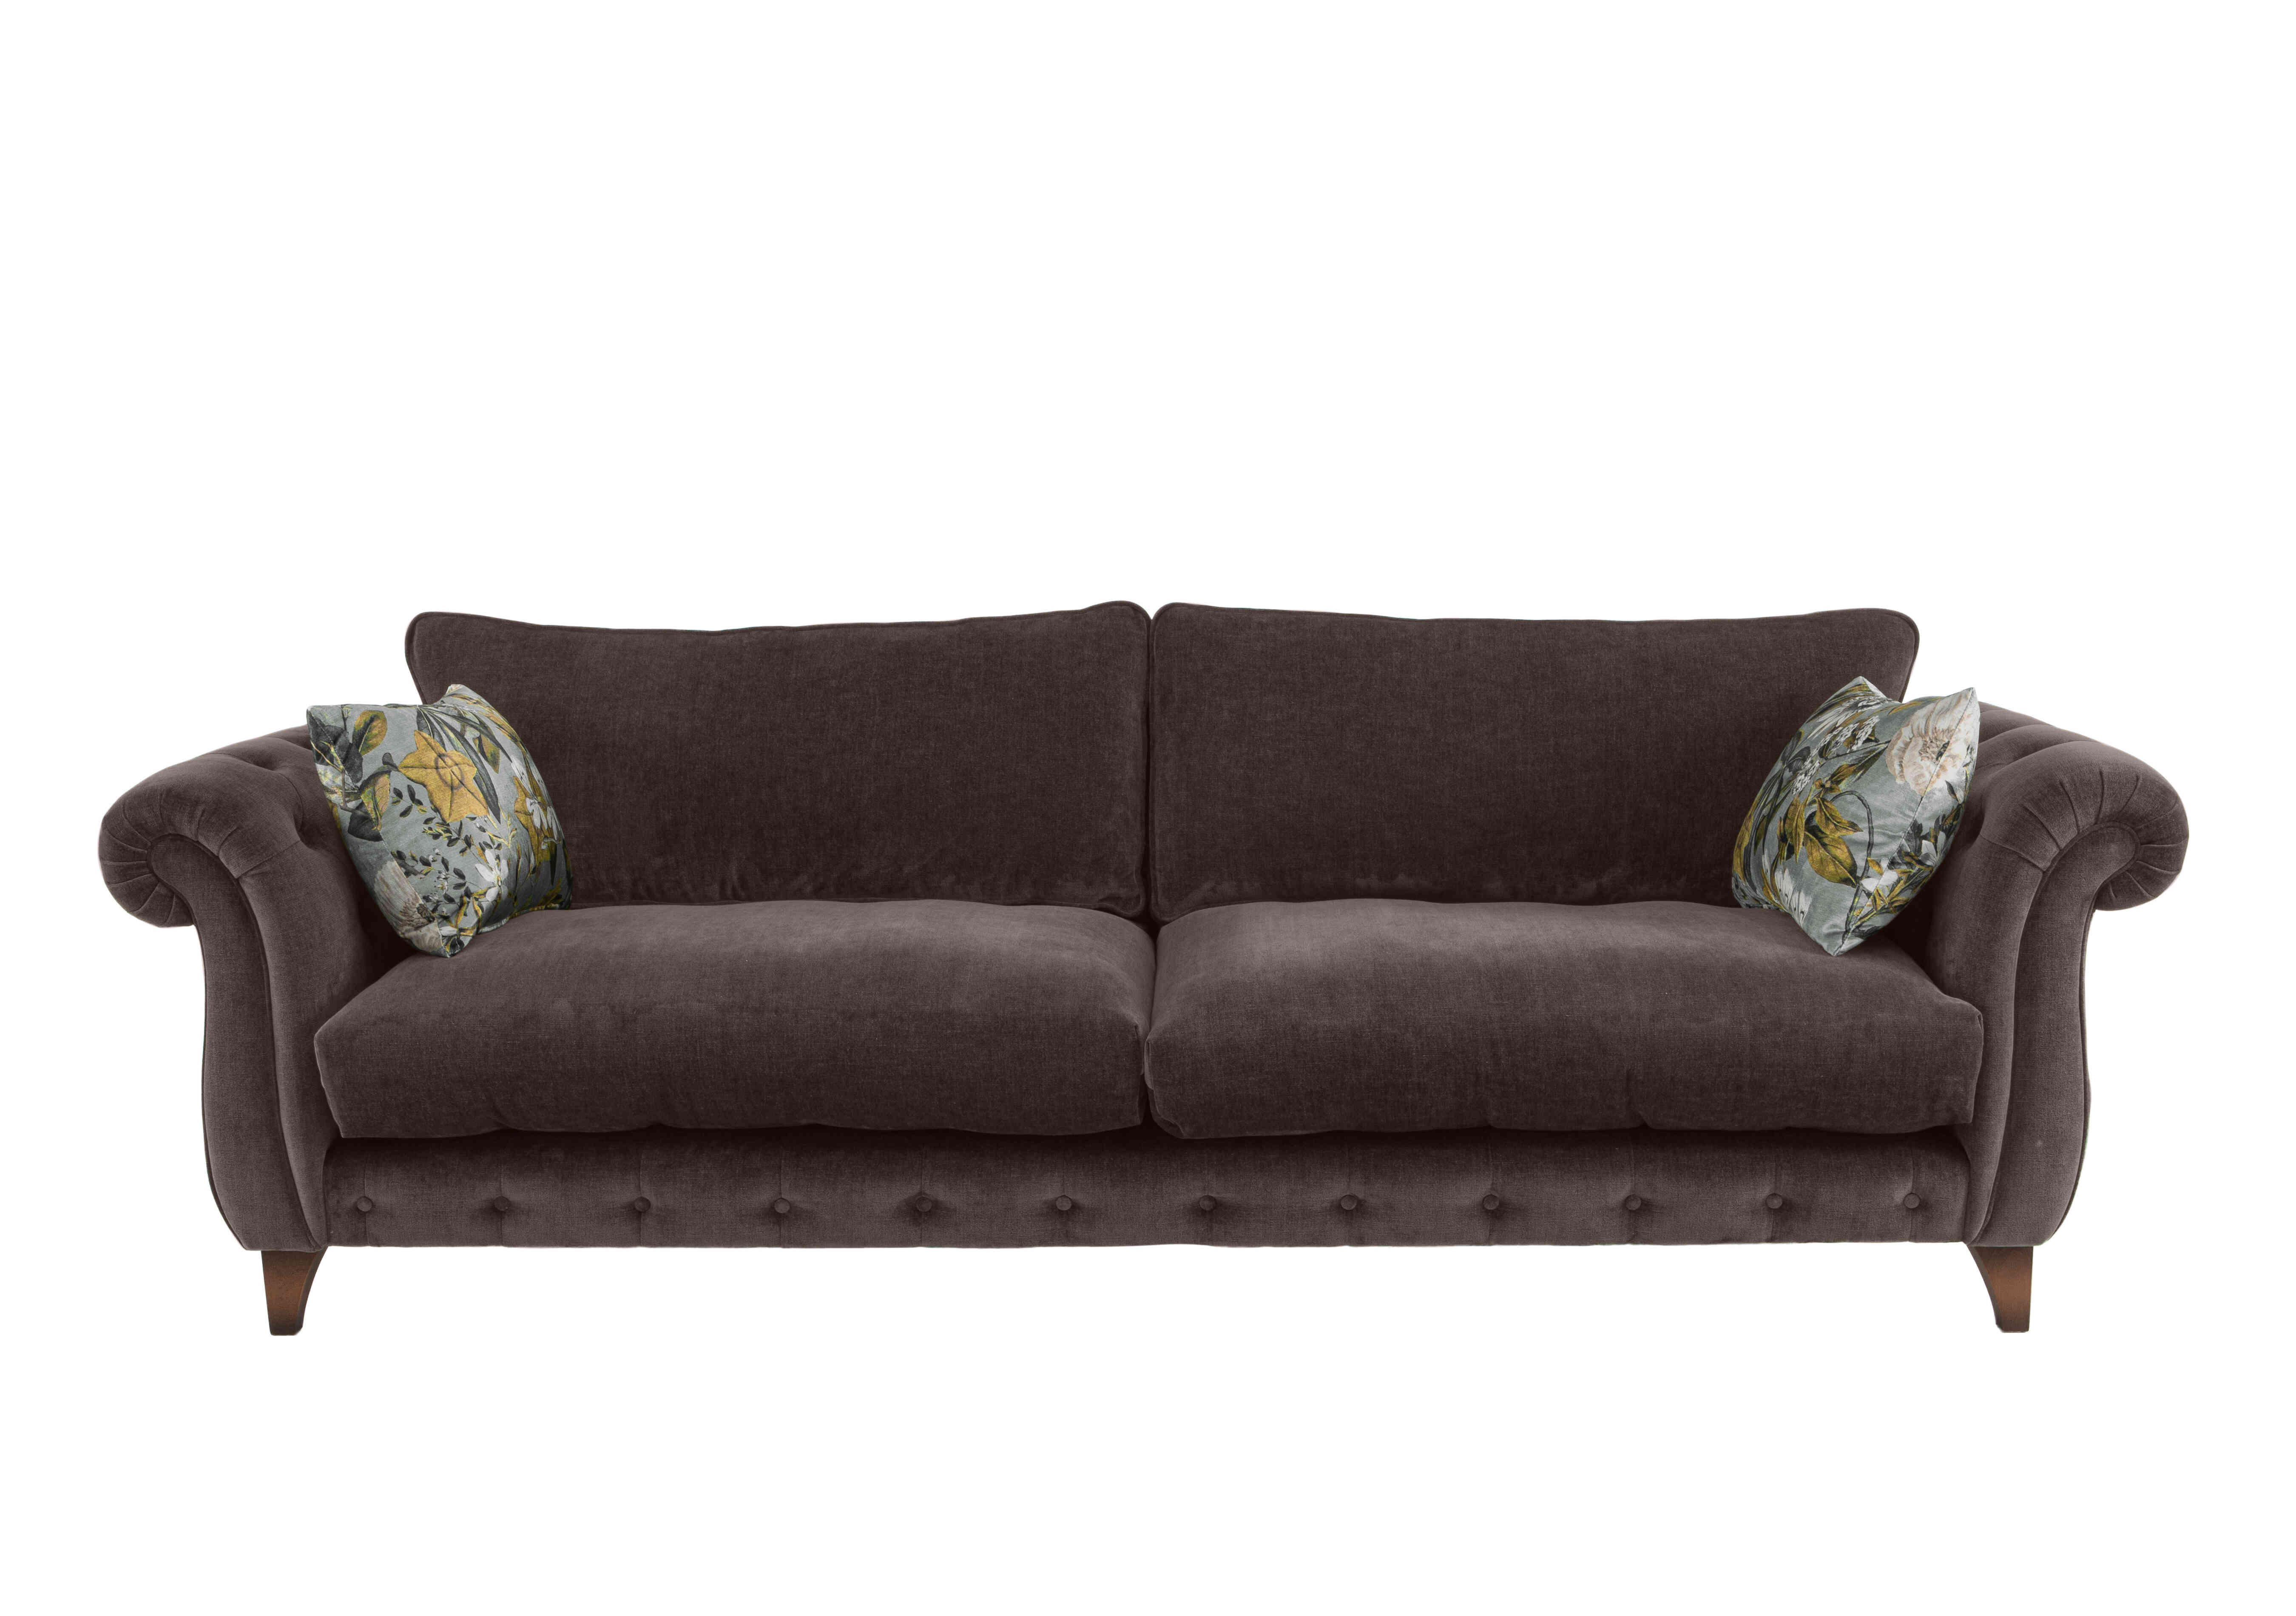 Boutique Palace Fabric 4 Seater Classic Back Sofa in Oasis Mocha on Furniture Village